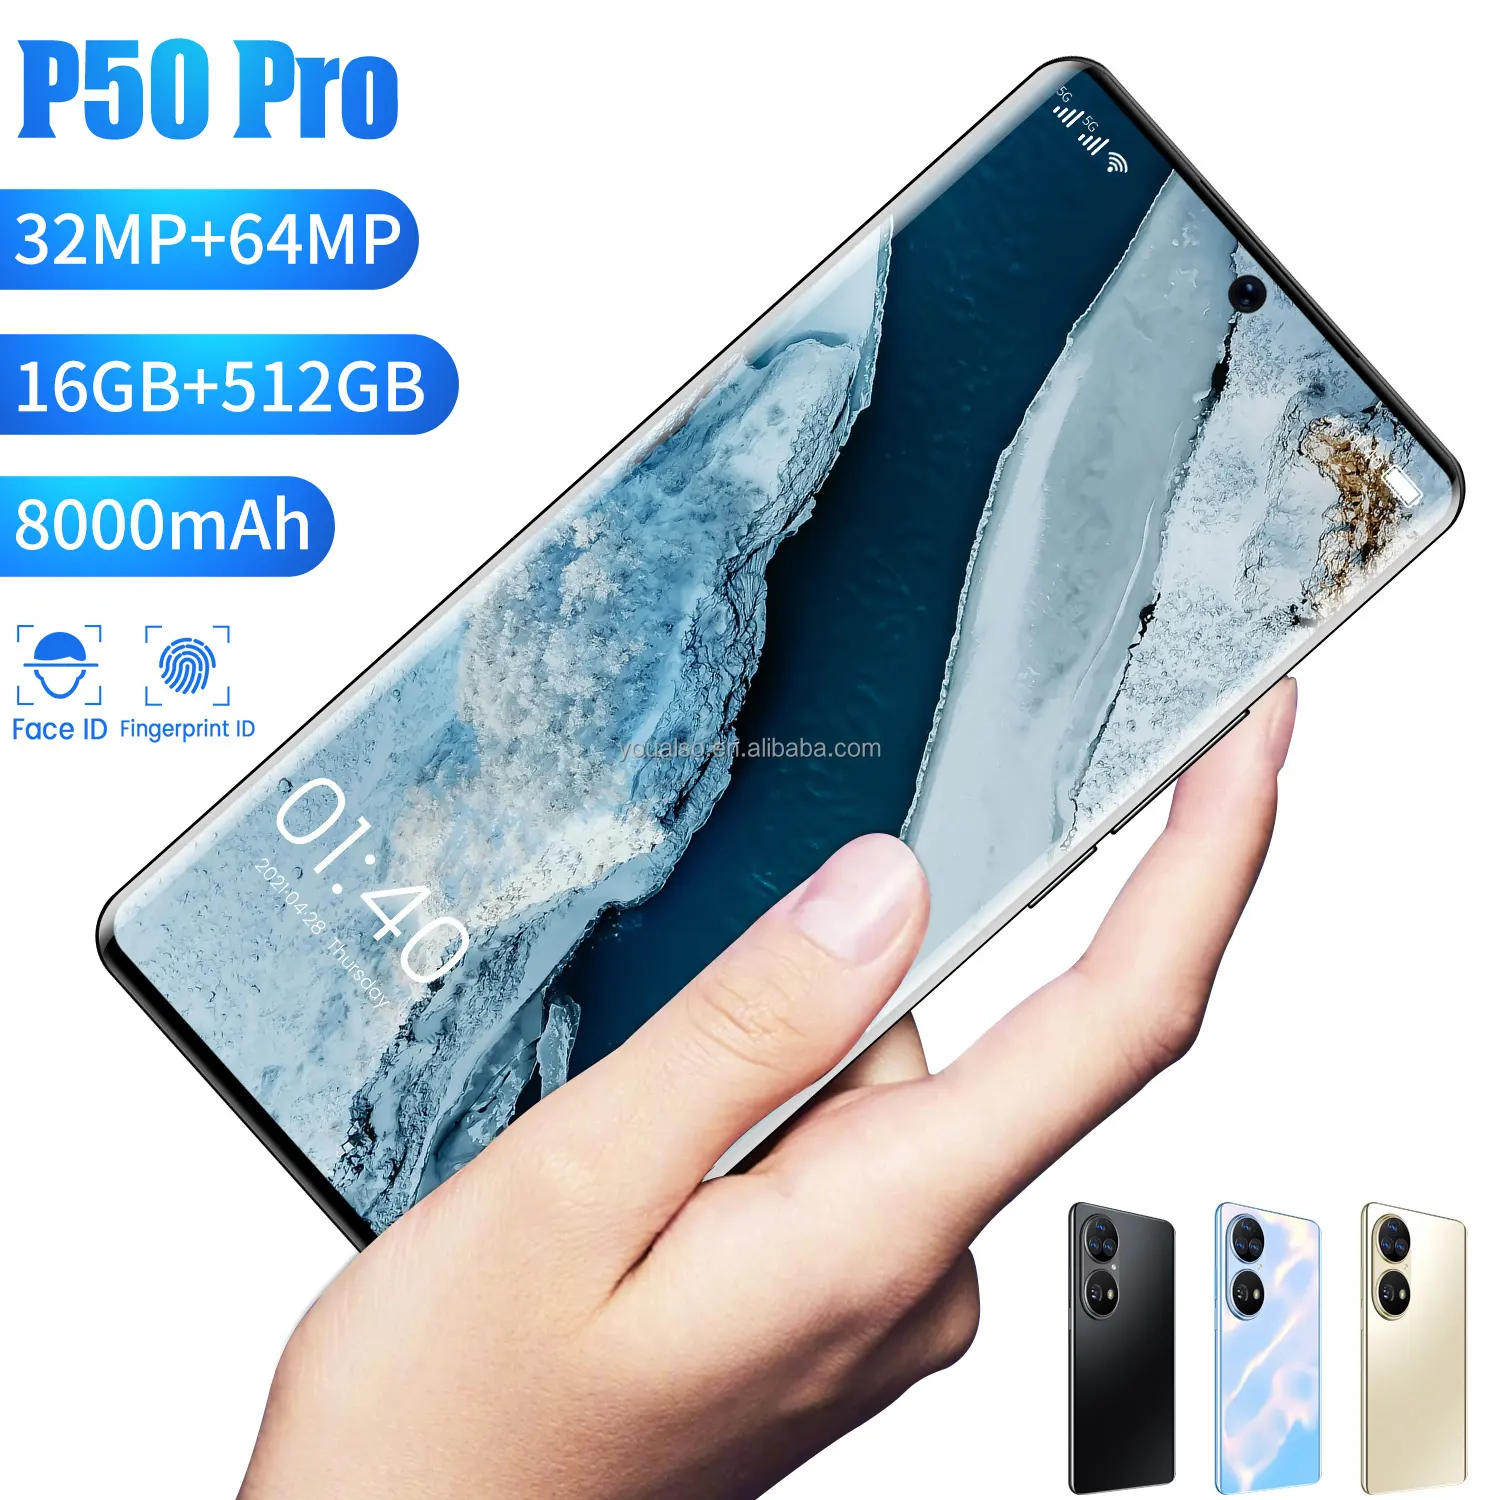 Global version Smartphone P50 Pro 12GB+512GB 7.6 Inch Supports Smart Face Recognition Screen Fingerprint Dual SIM Card 4G 5G